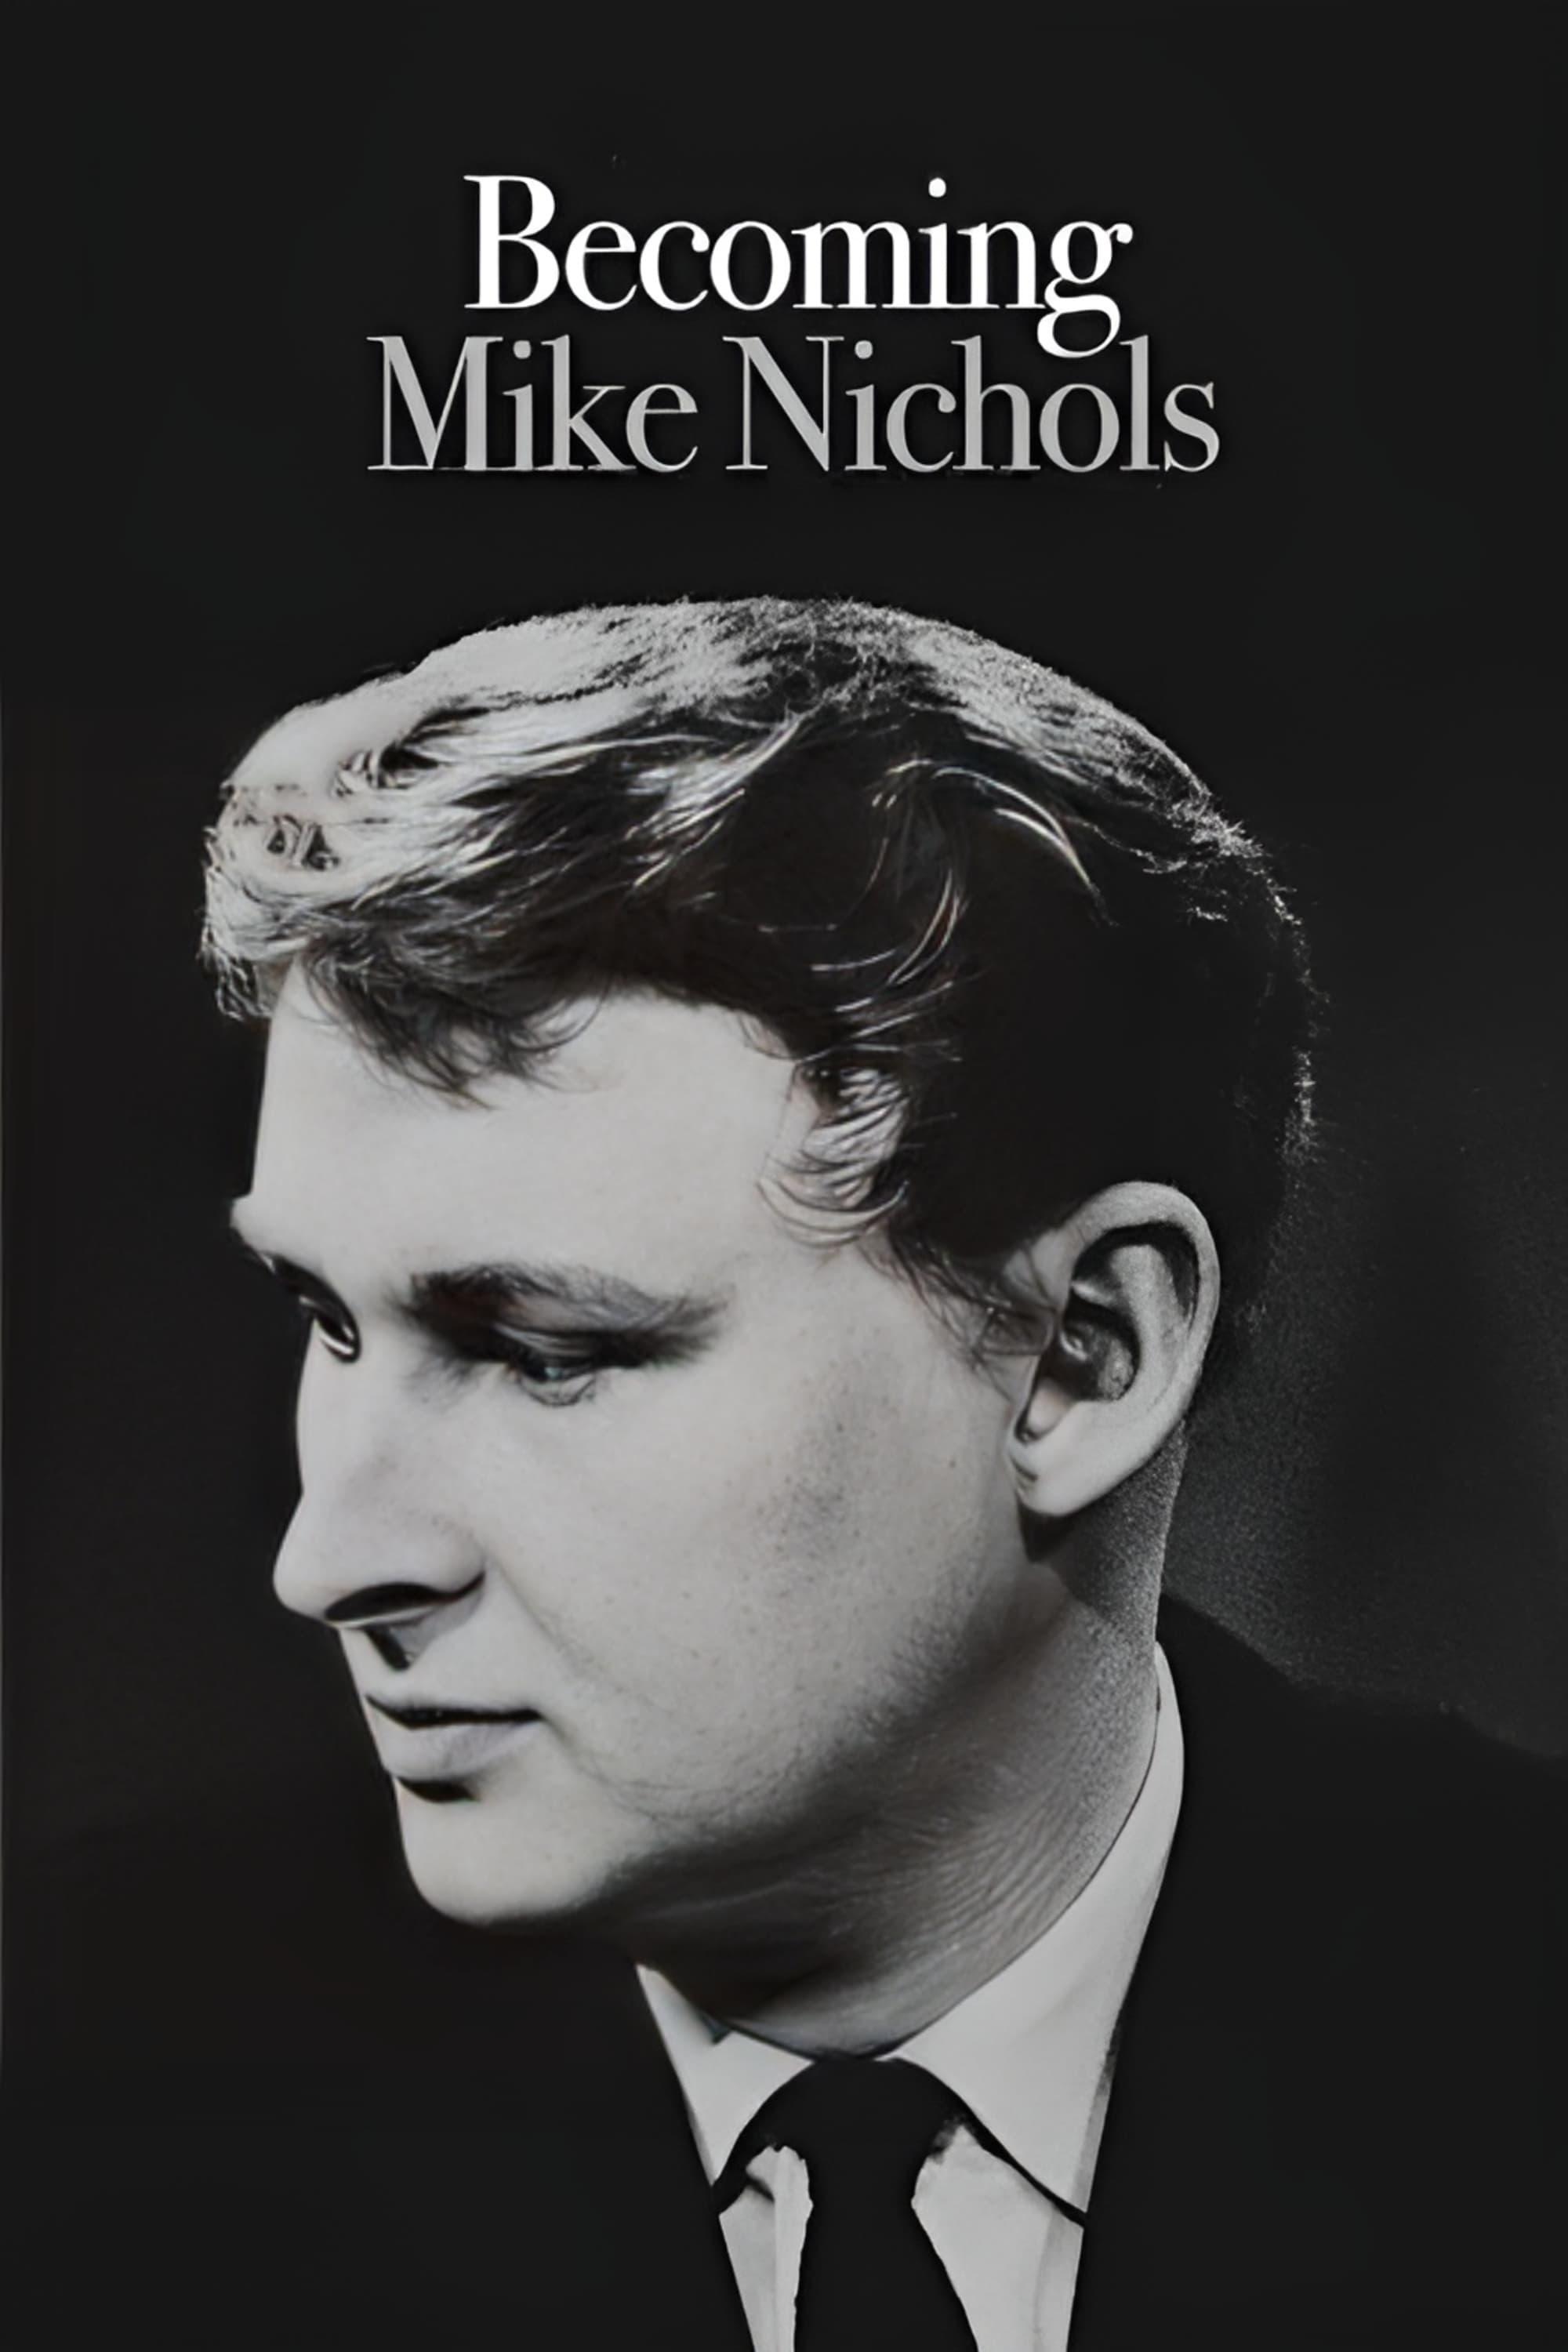 Becoming Mike Nichols poster